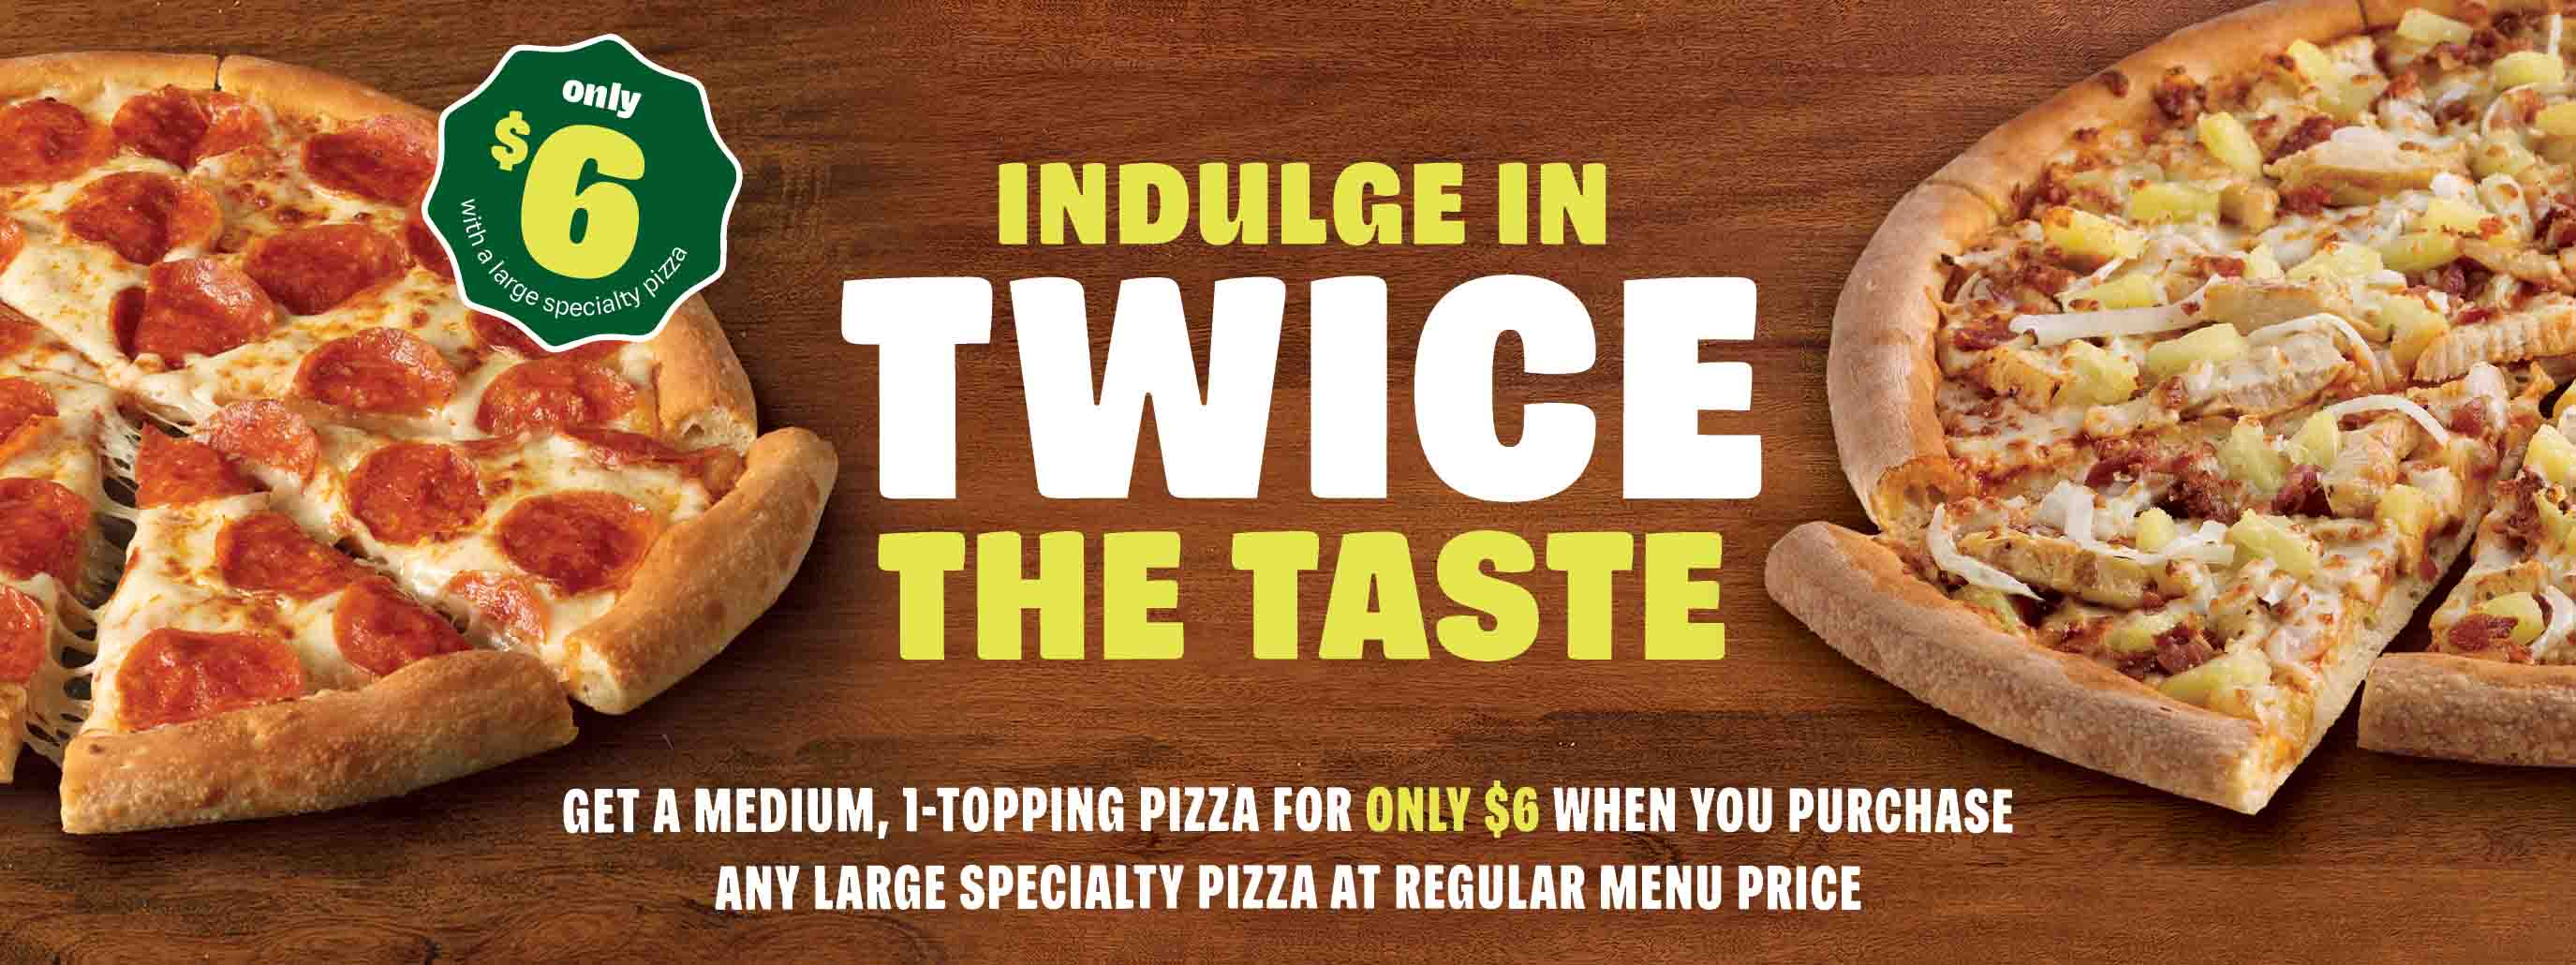 Indulge twice the taste. Get a medium, 1-topping pizza for only $6 when you purchase any large specialty pizza at regular menu price.